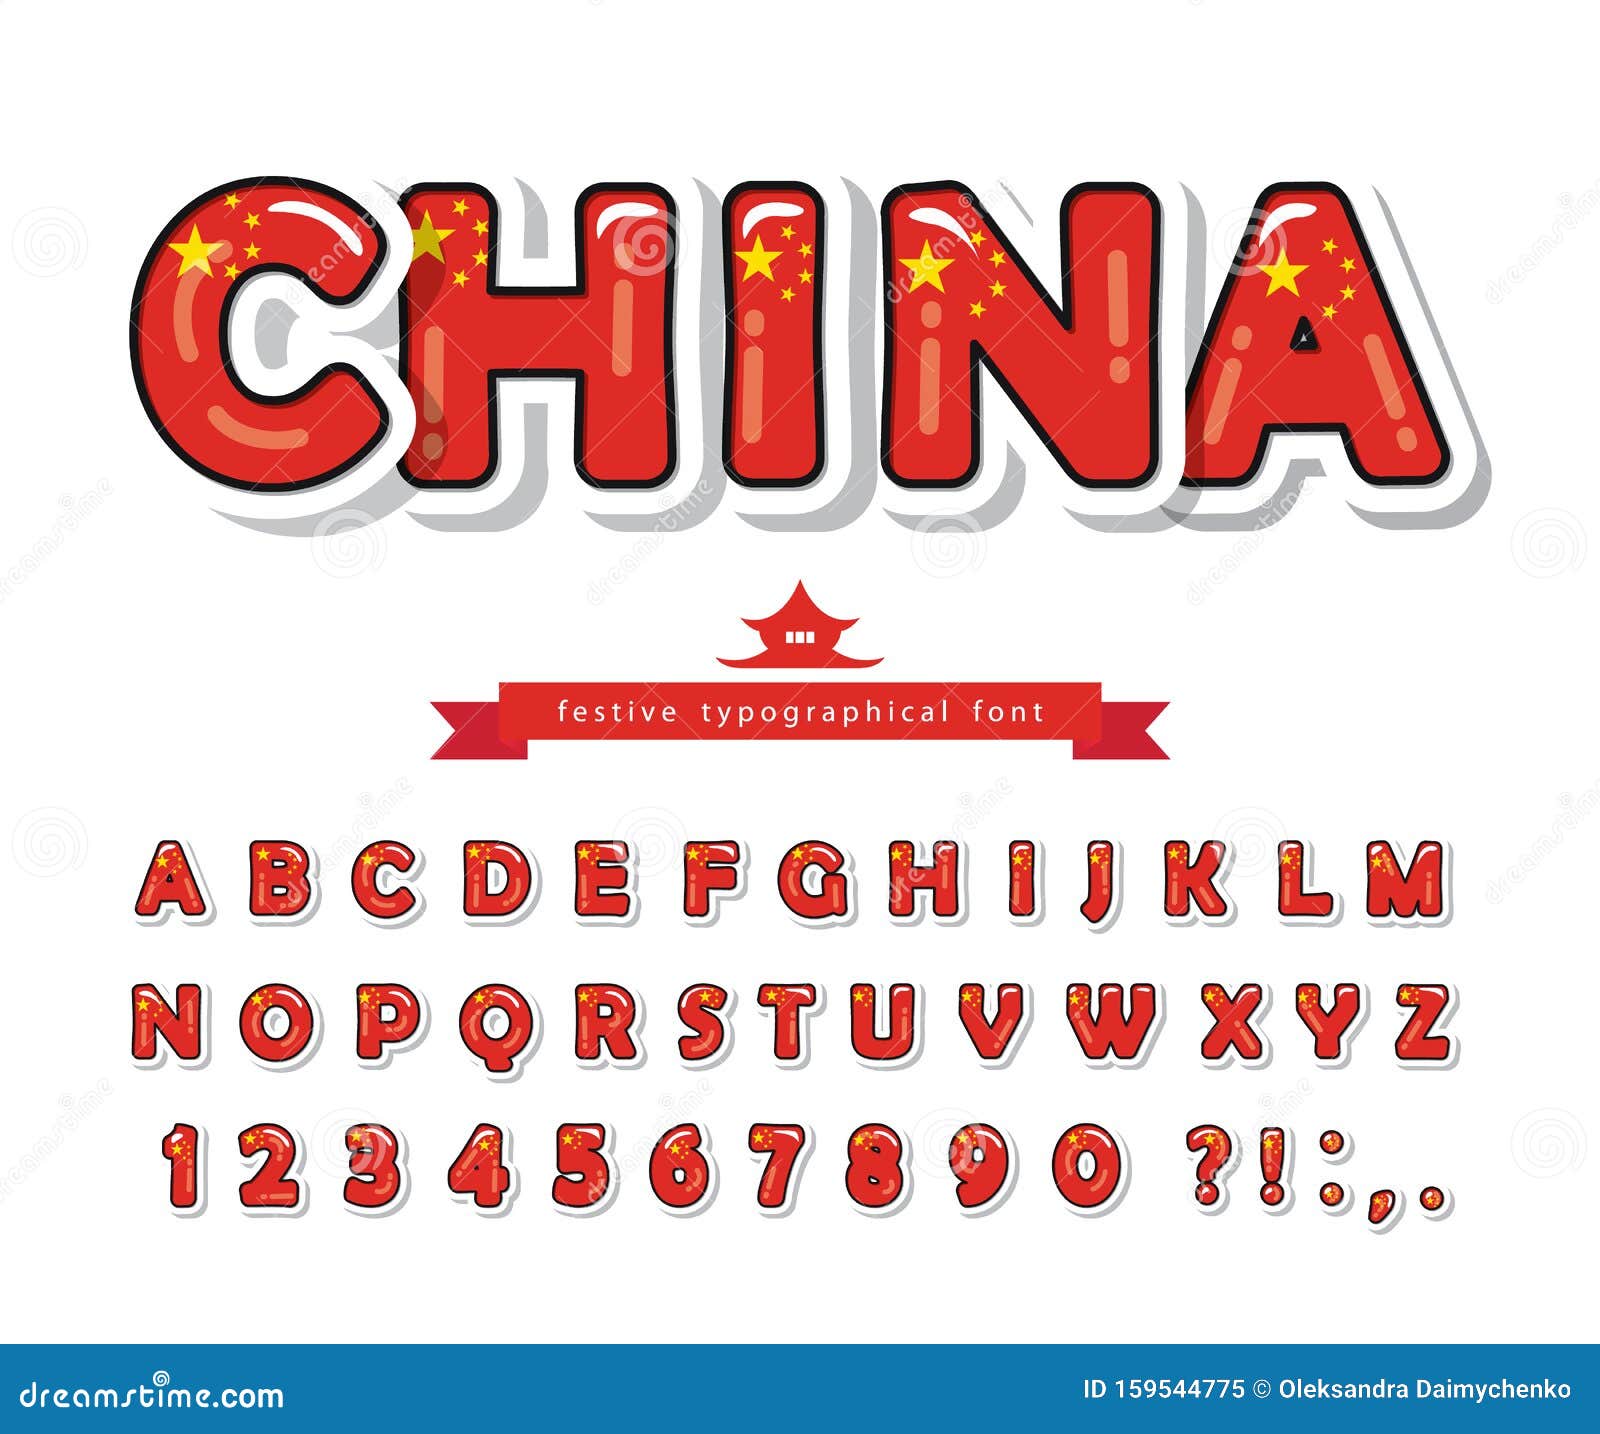 China Cartoon Font. Chinese National Flag Colors. Paper Cutout Glossy ABC  Letters and Numbers Stock Illustration - Illustration of letter, label:  159544775